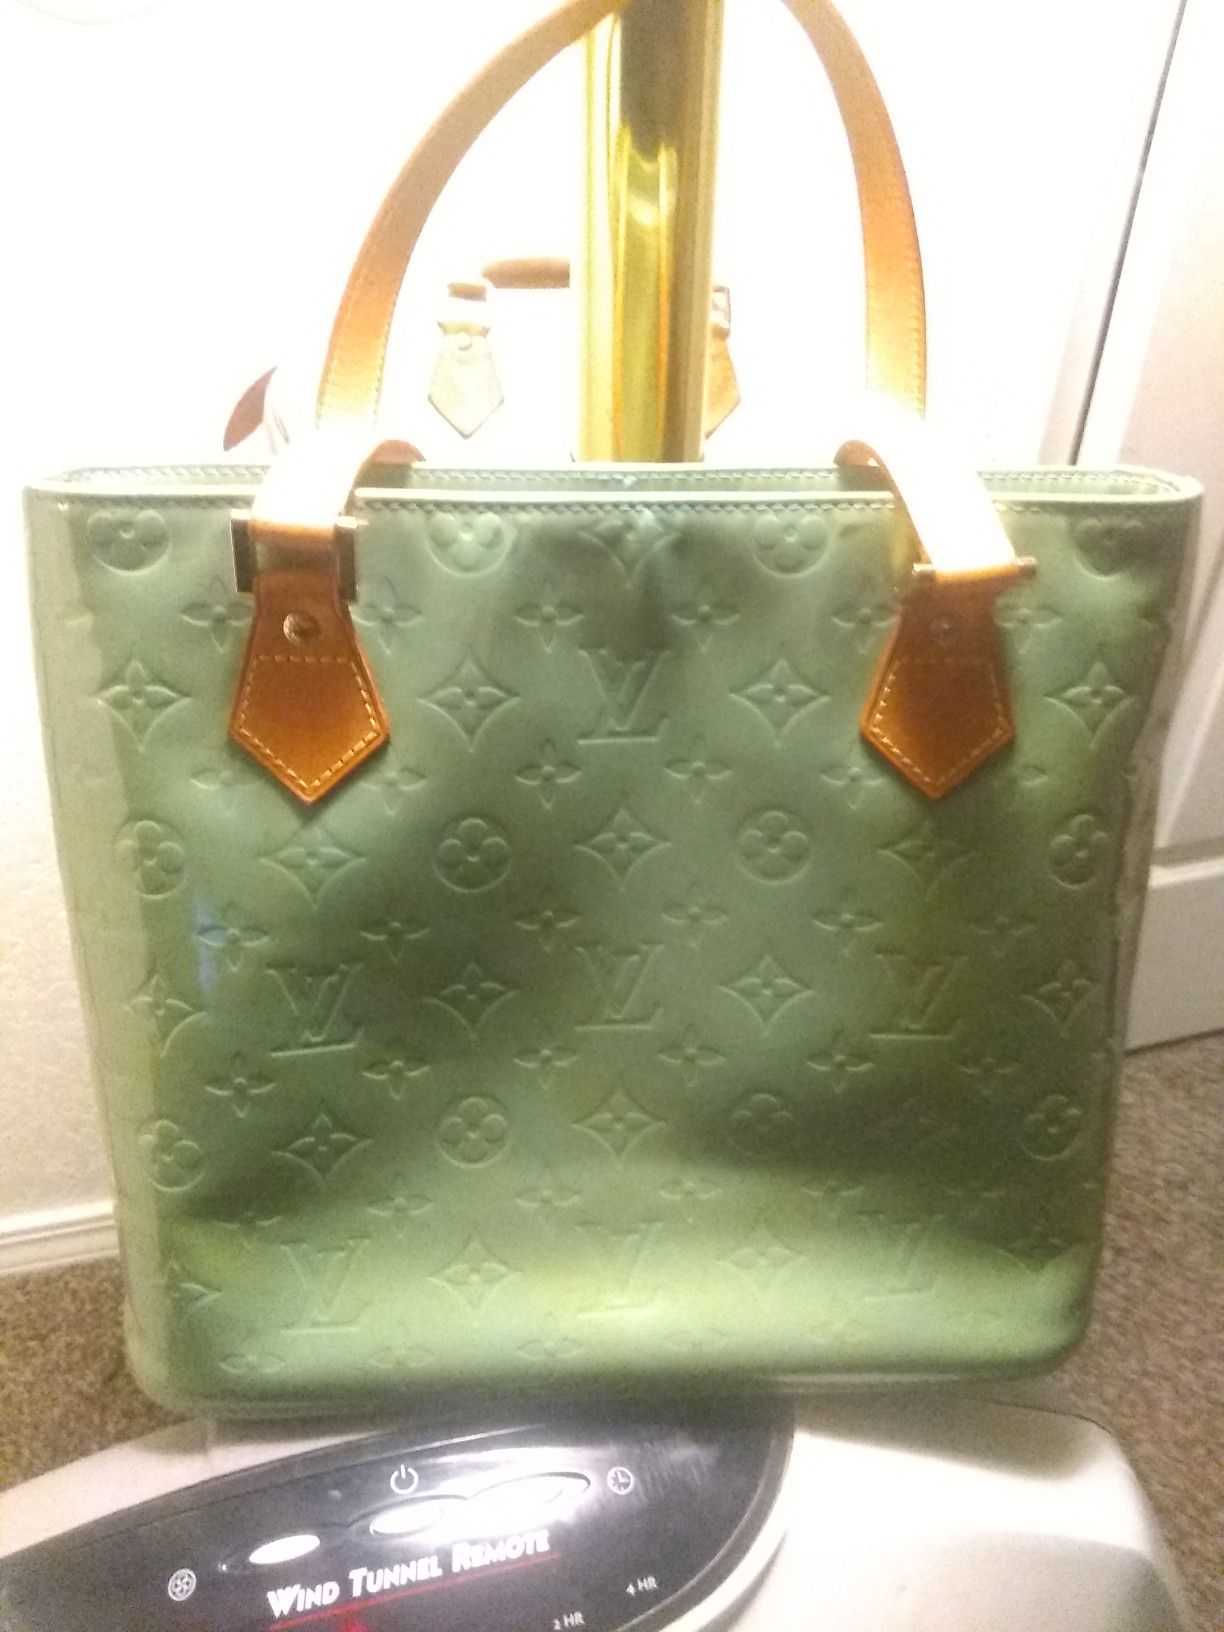 Authentic bag/ tote purse $125 Firm